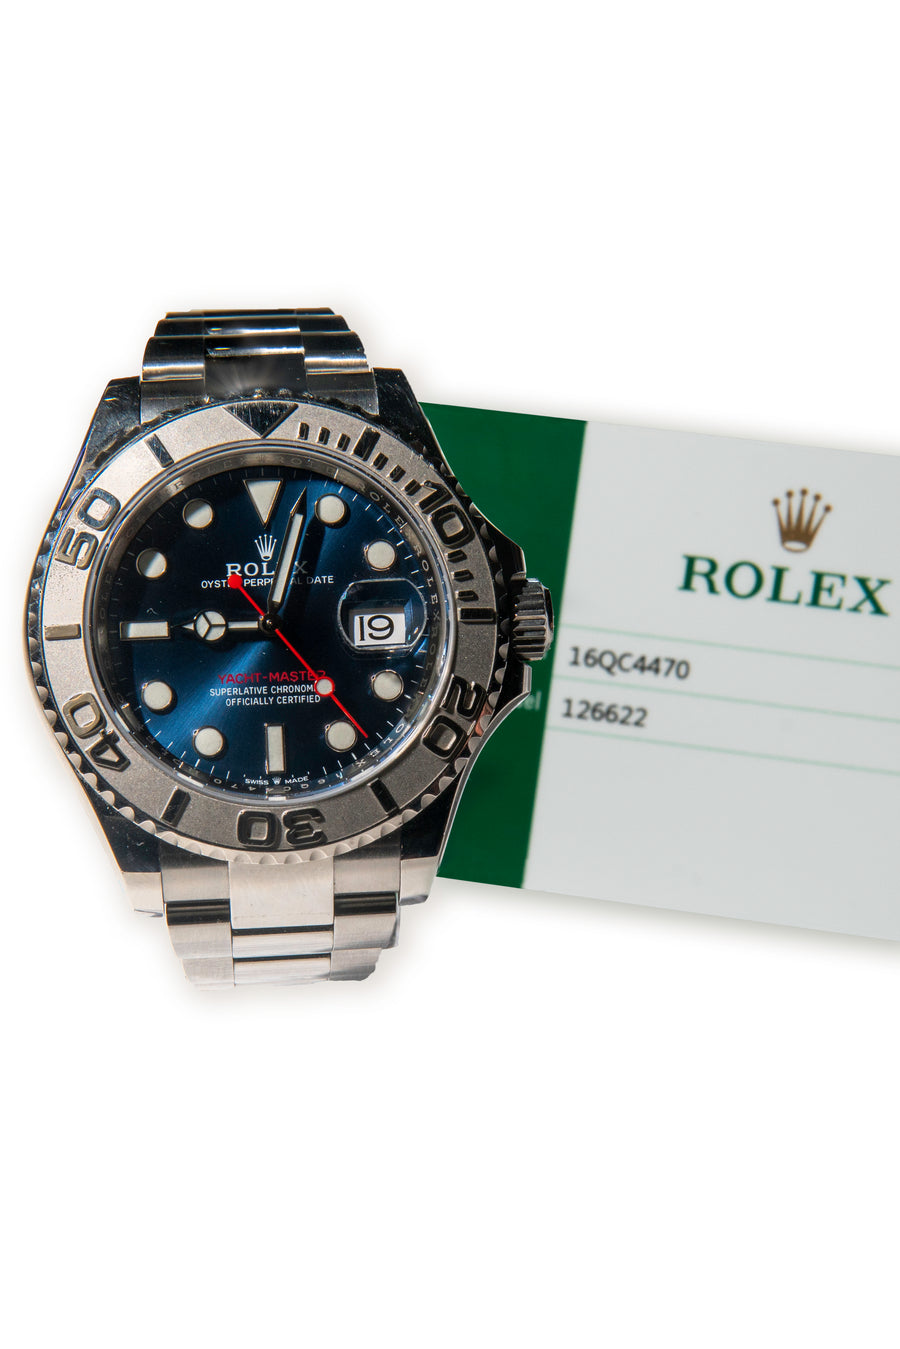 Rolex Yachtmaster Ref# 126622 with Warranty Card